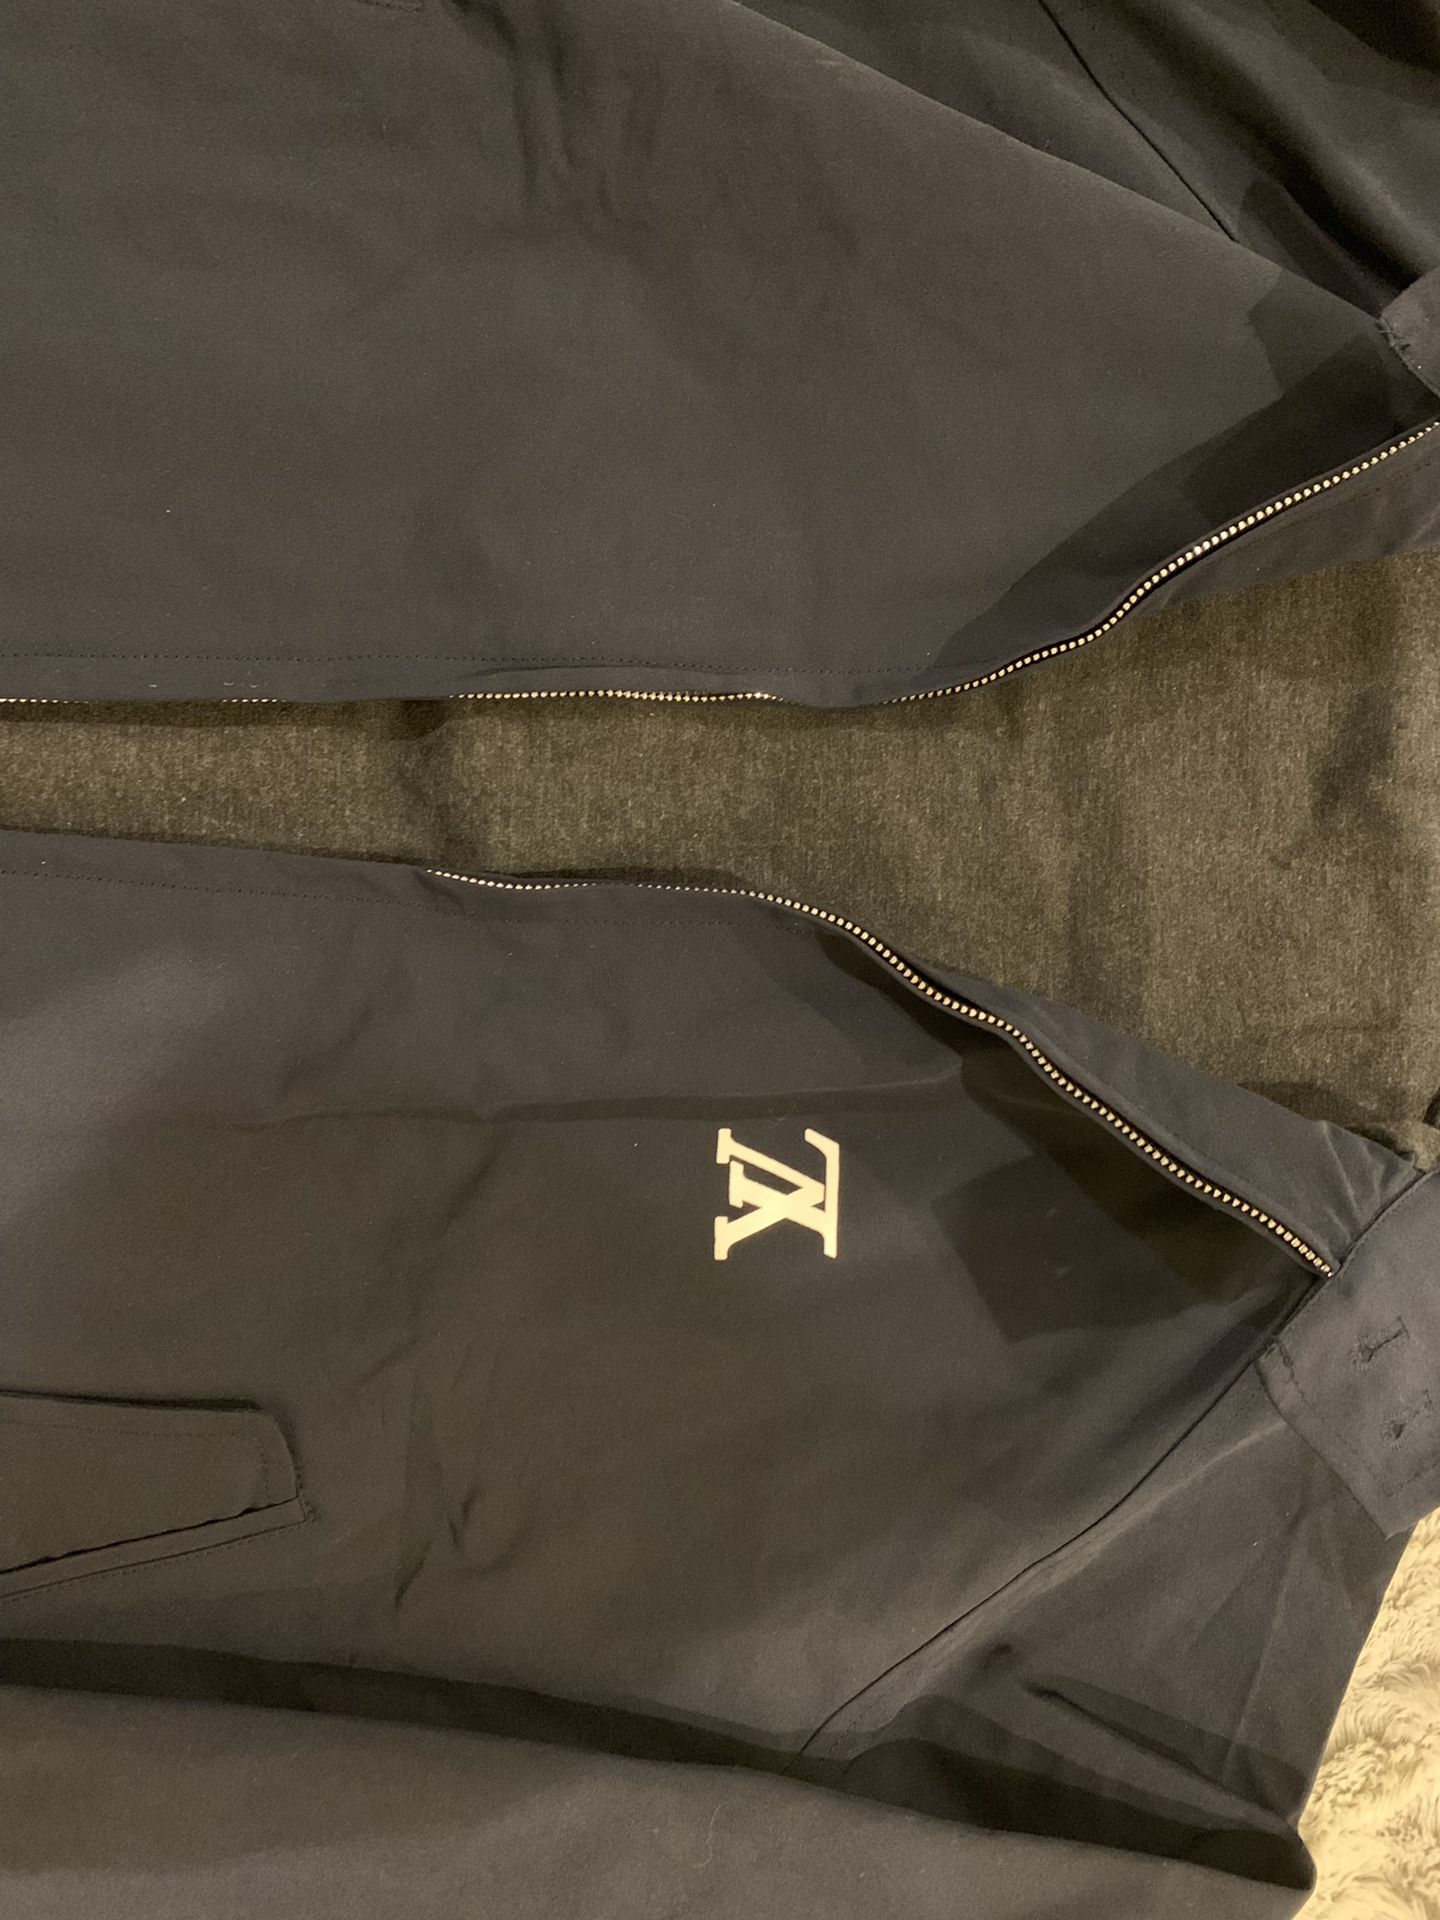 Louis Vuitton love and peace jacket retail 3000$ for Sale in